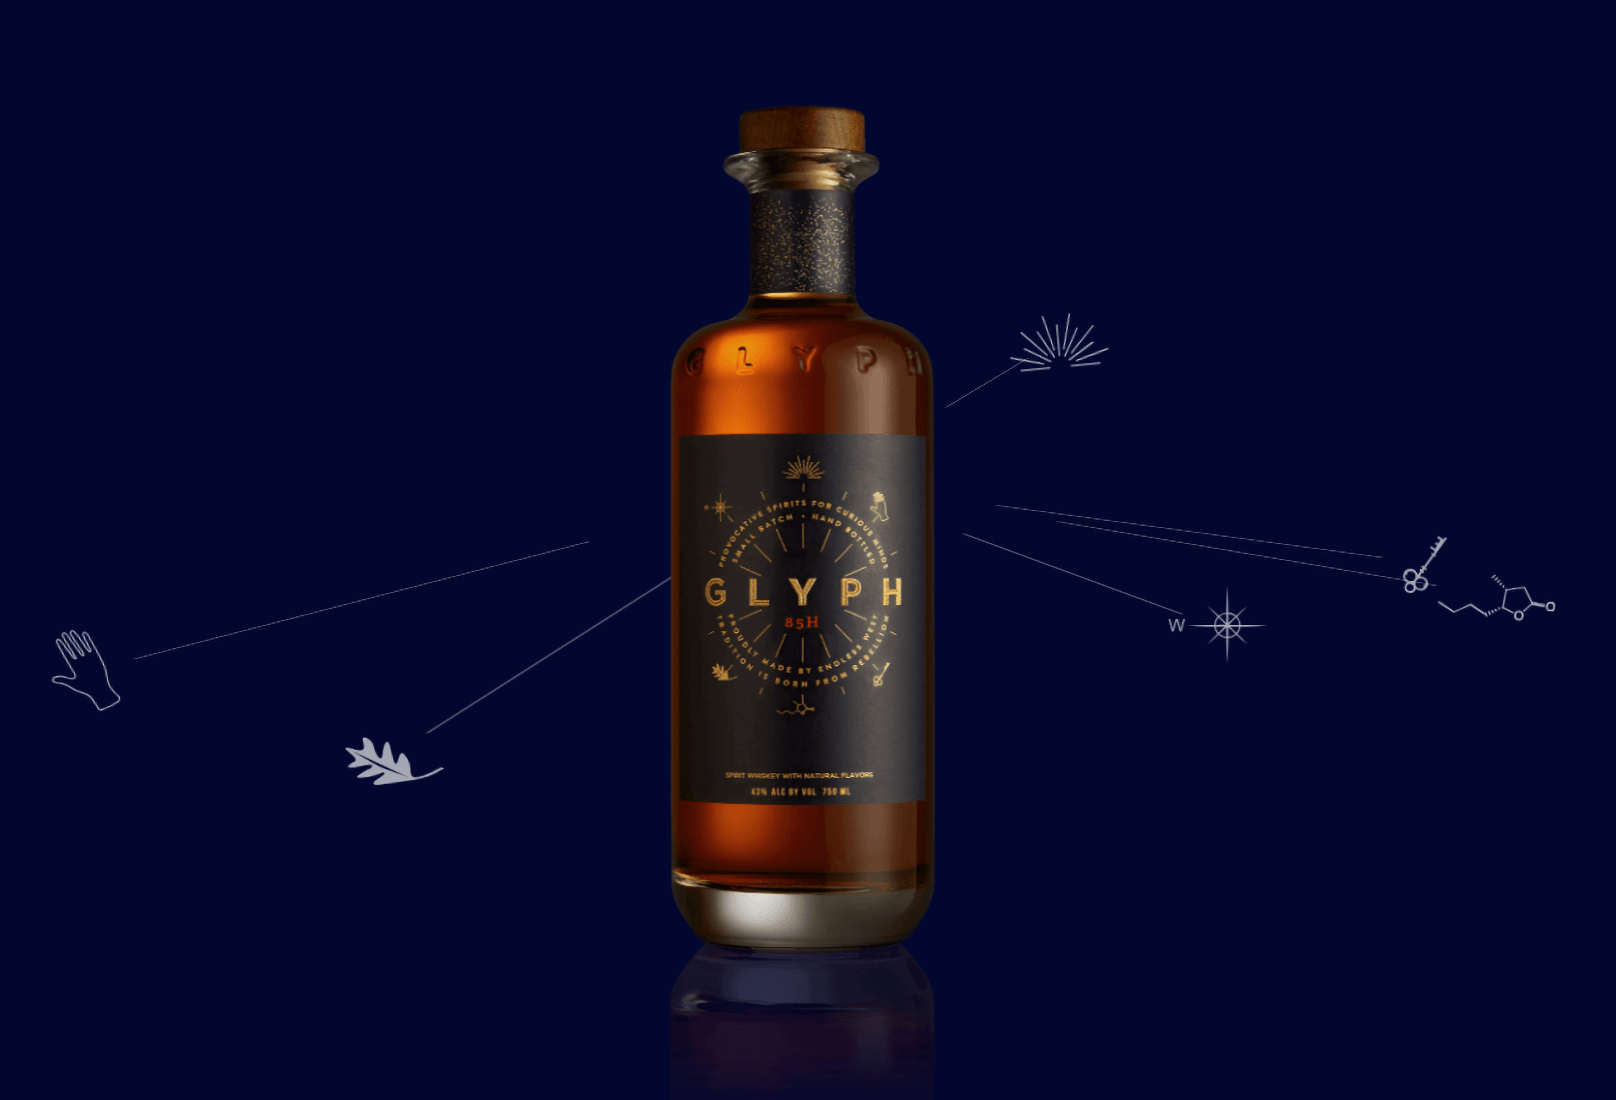 Endless West icons orbiting around a bottle of Glyph whisky